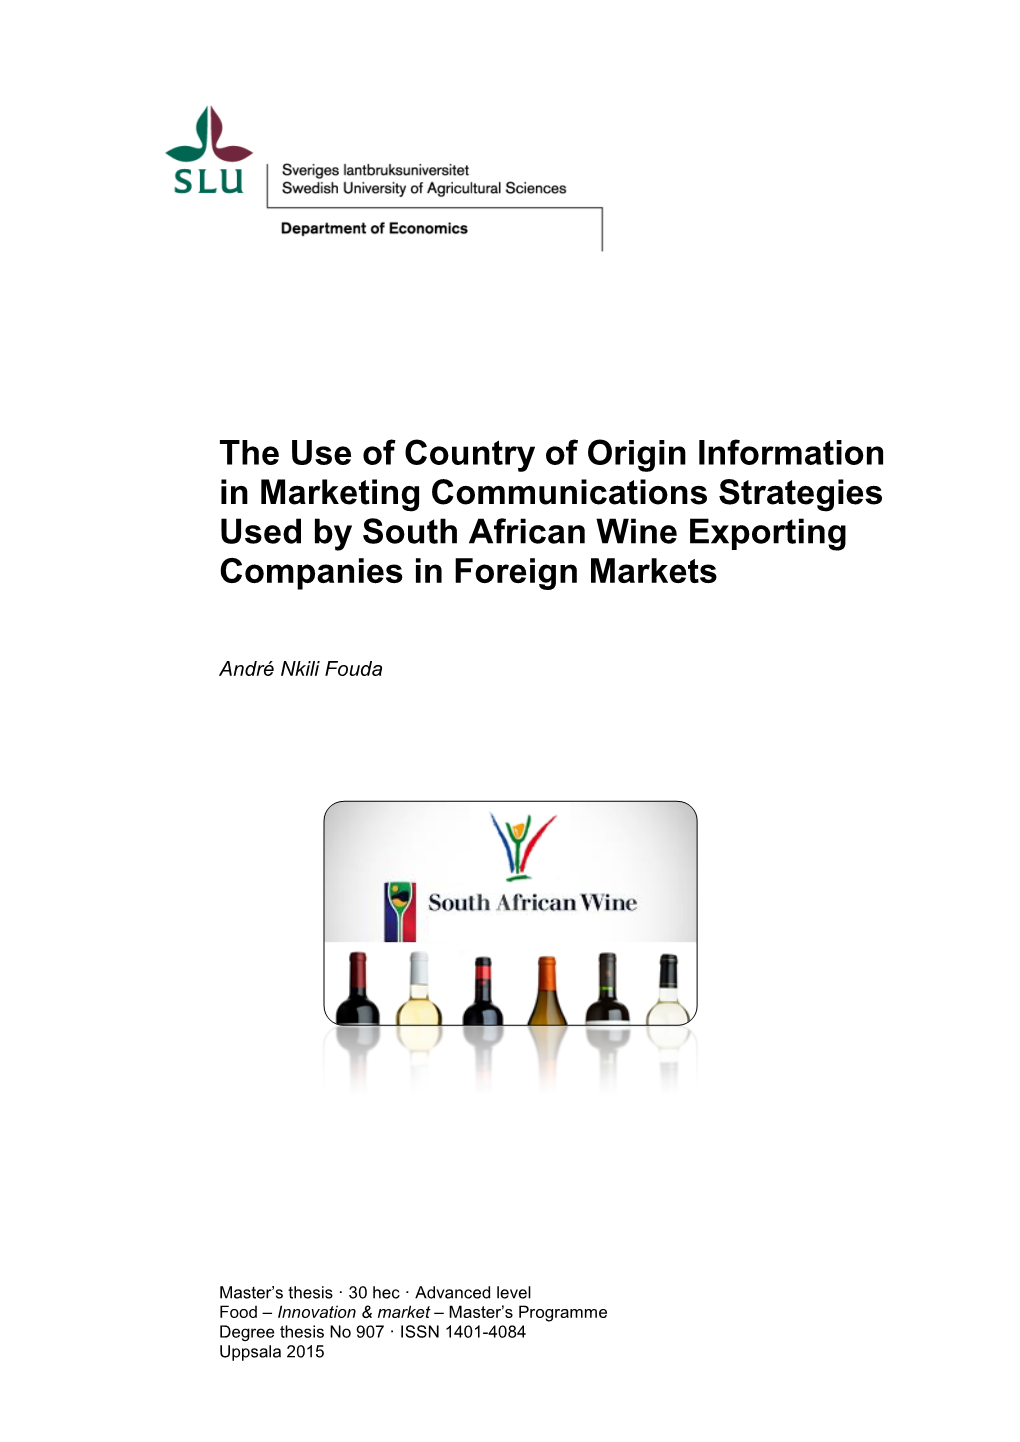 The Use of Country of Origin Information in Marketing Communications Strategies Used by South African Wine Exporting Companies in Foreign Markets